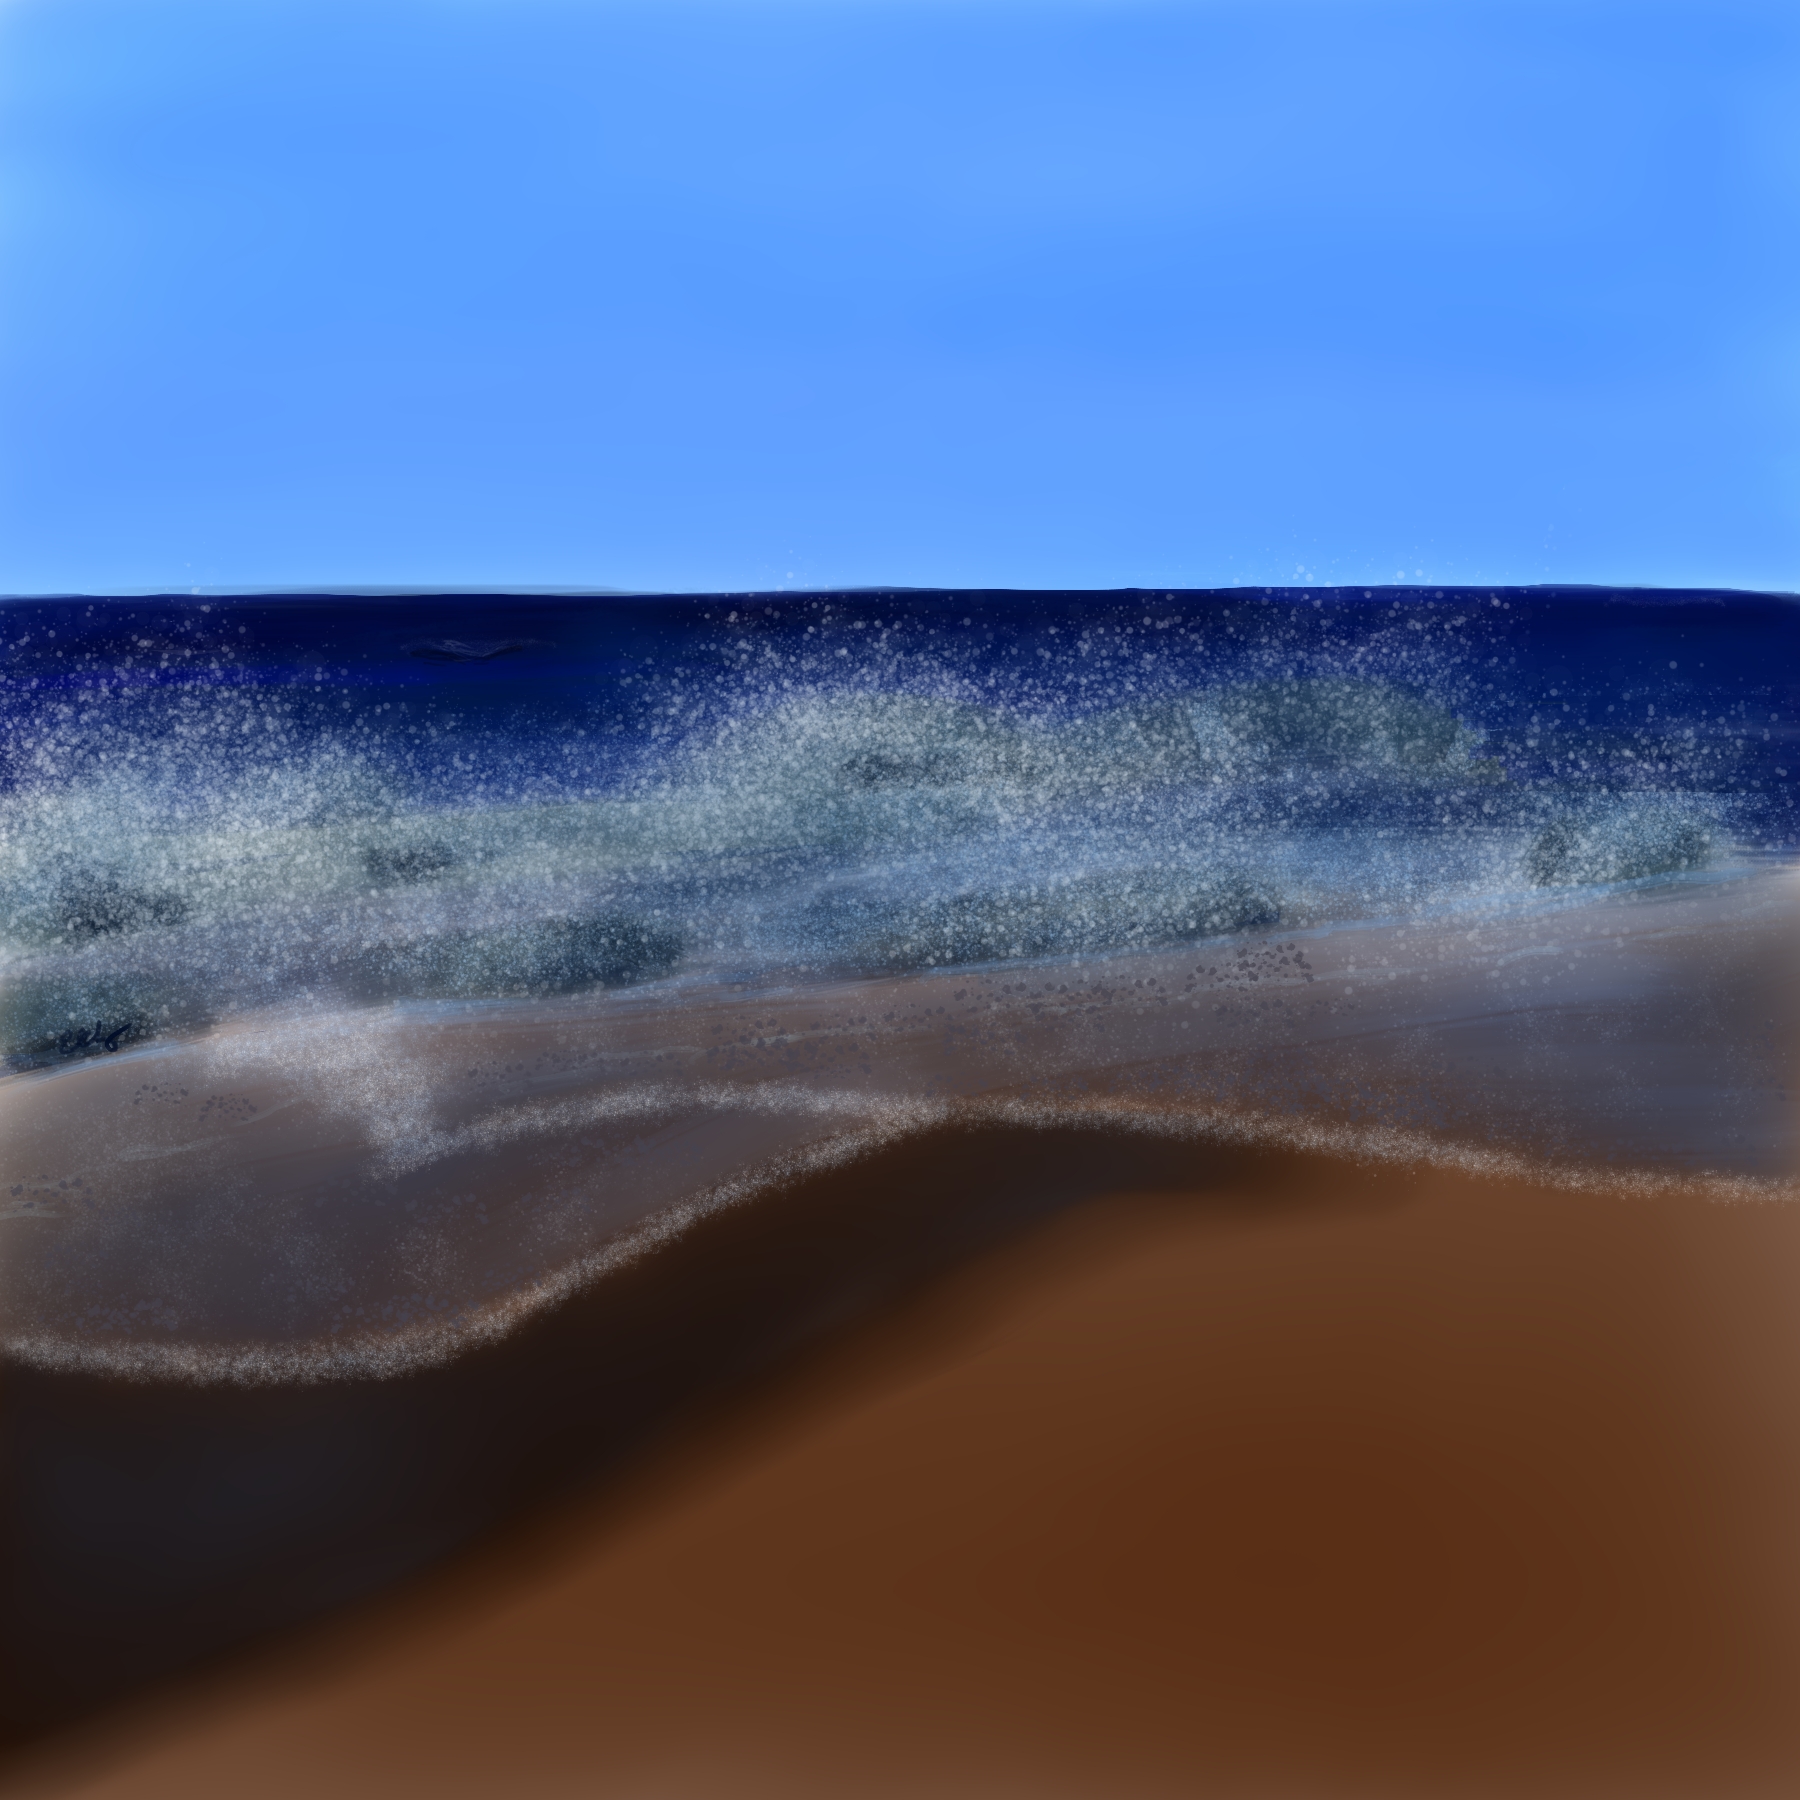 Final version of painting titled 'Waves Of Love' showing waves breaking at the shore